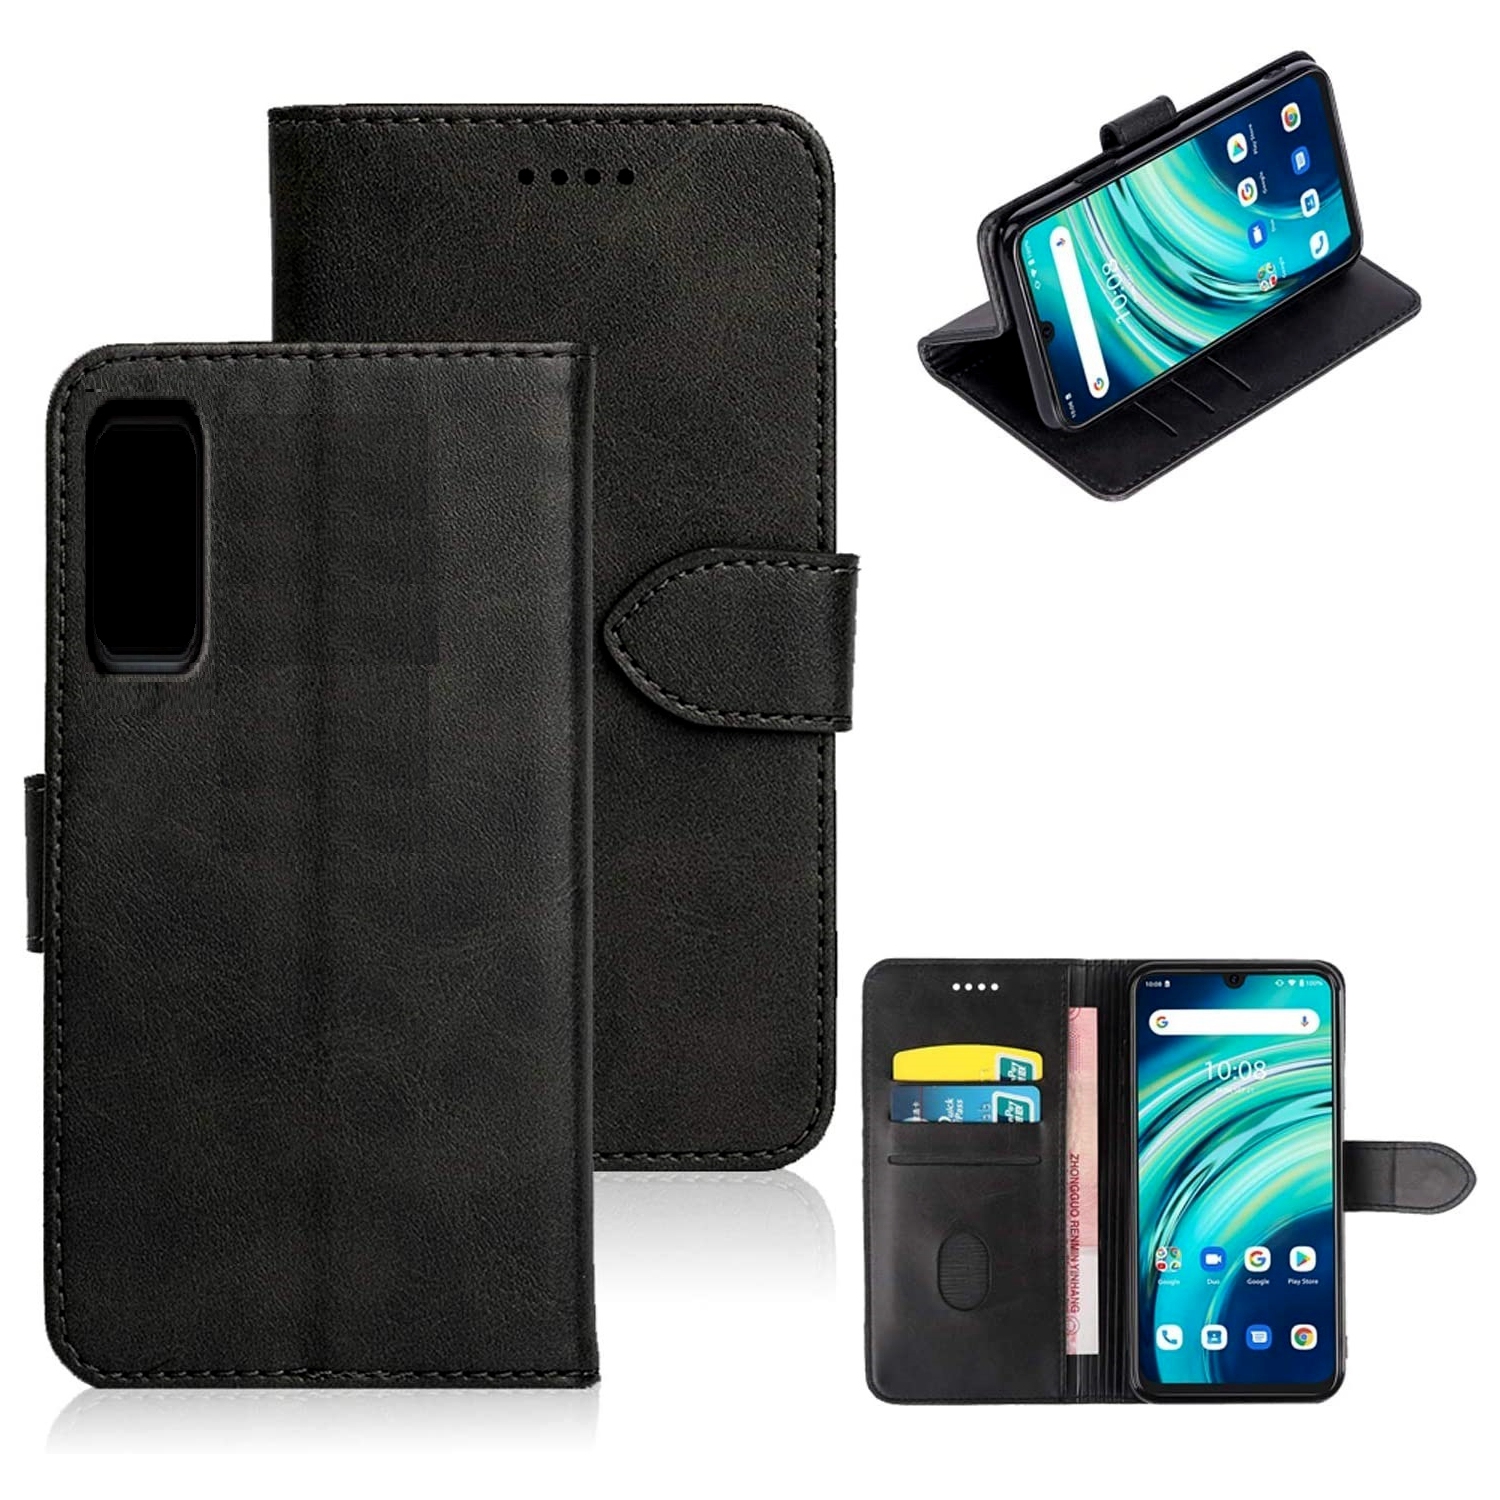 TopSave Leather Folio Flip Wallet w/Magnetic Clip Card Slot Holder Case For TCL 20S, Black